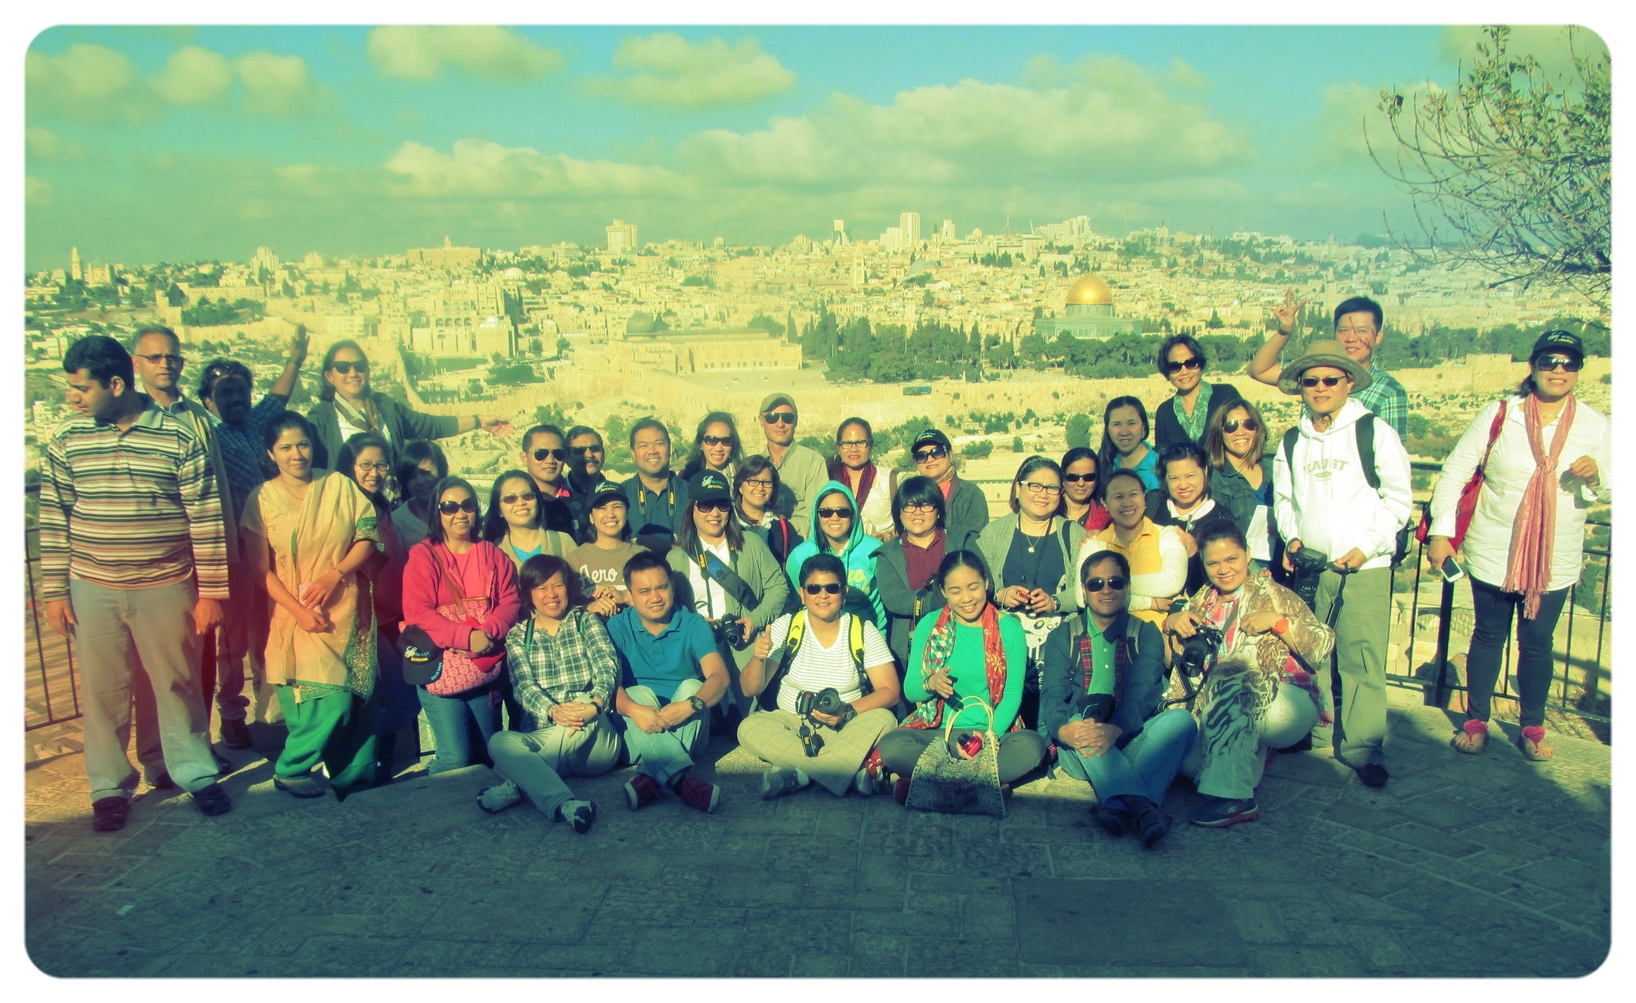 With the Filipino tourists on Mt. of Olives, 2014